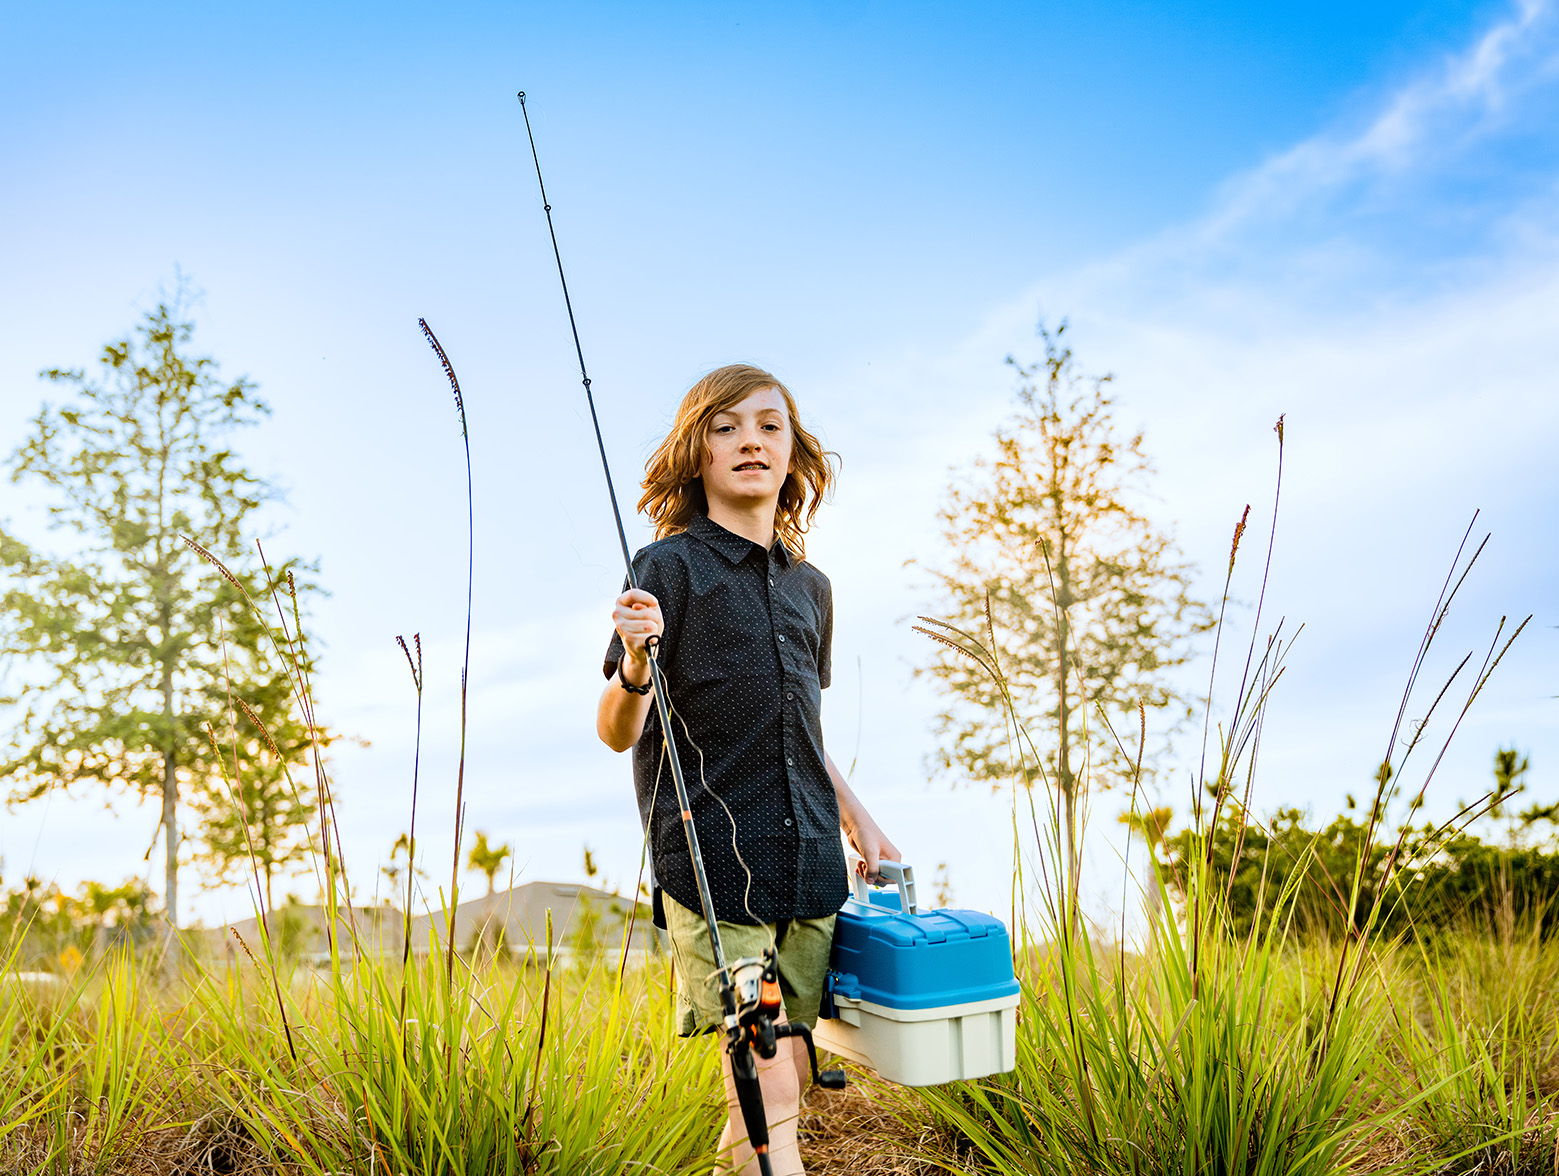 Young boy carries fishing gear to a pond.